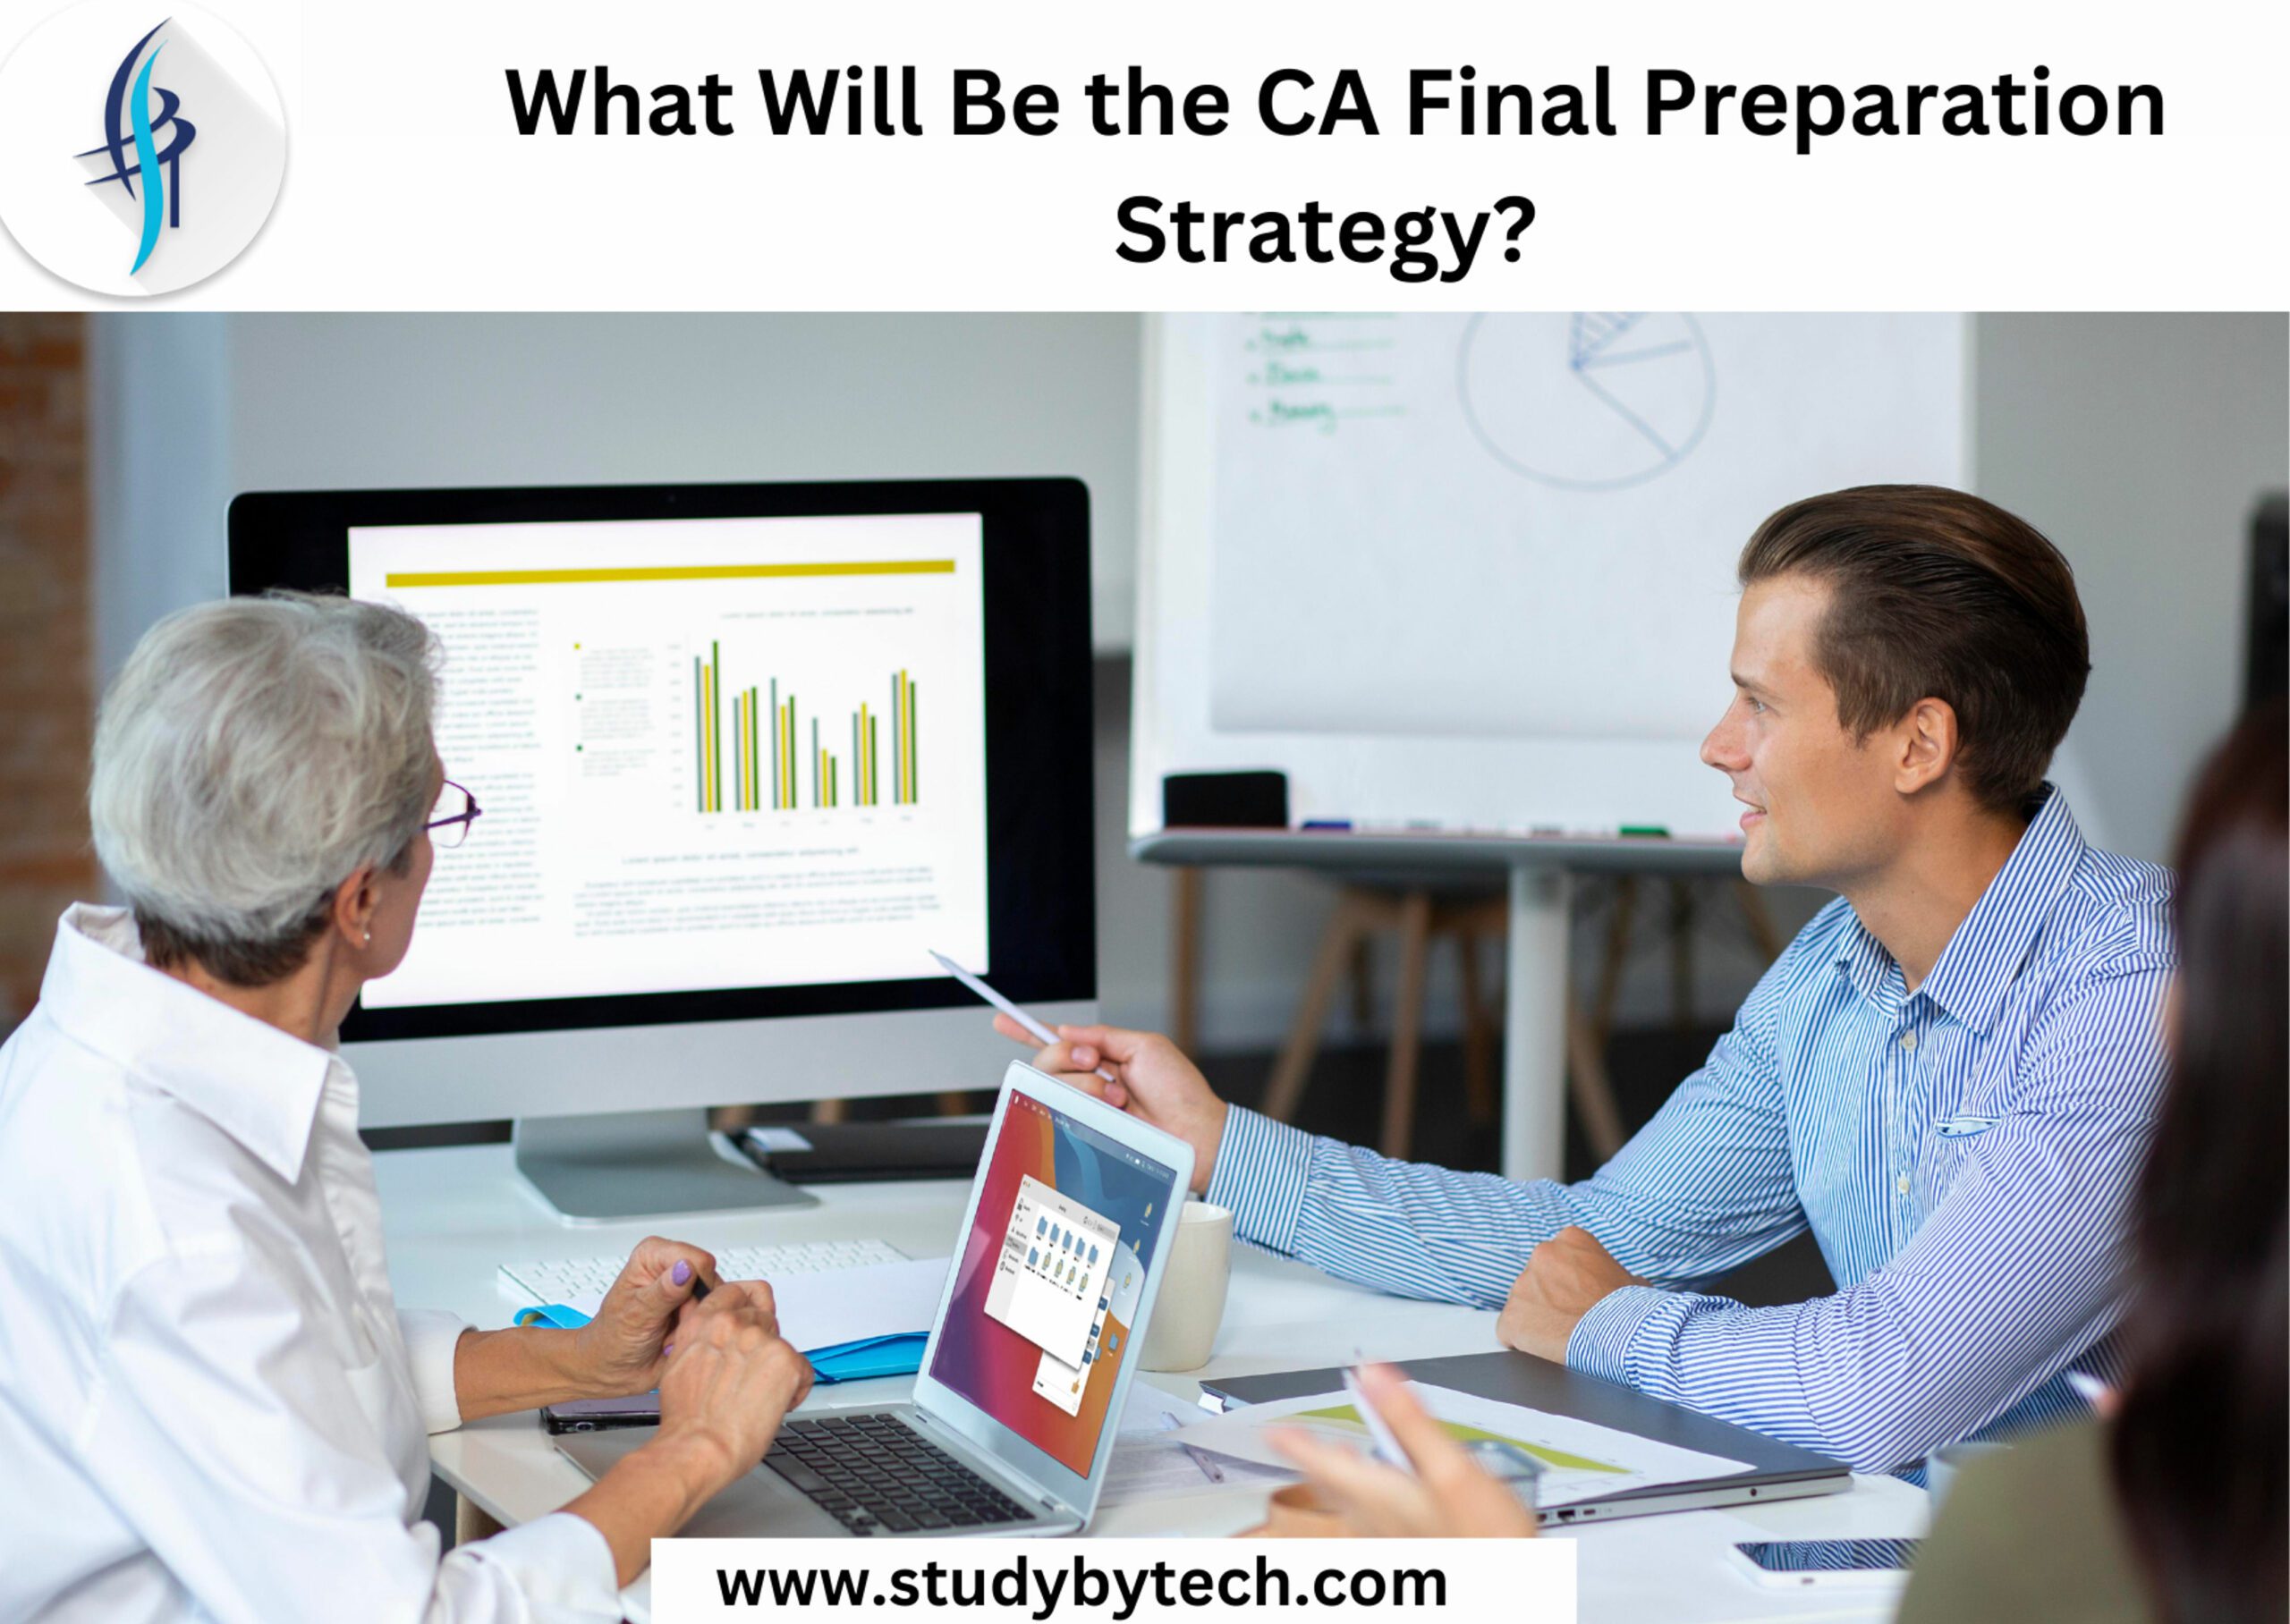 What Will Be the CA Final Preparation Strategy?